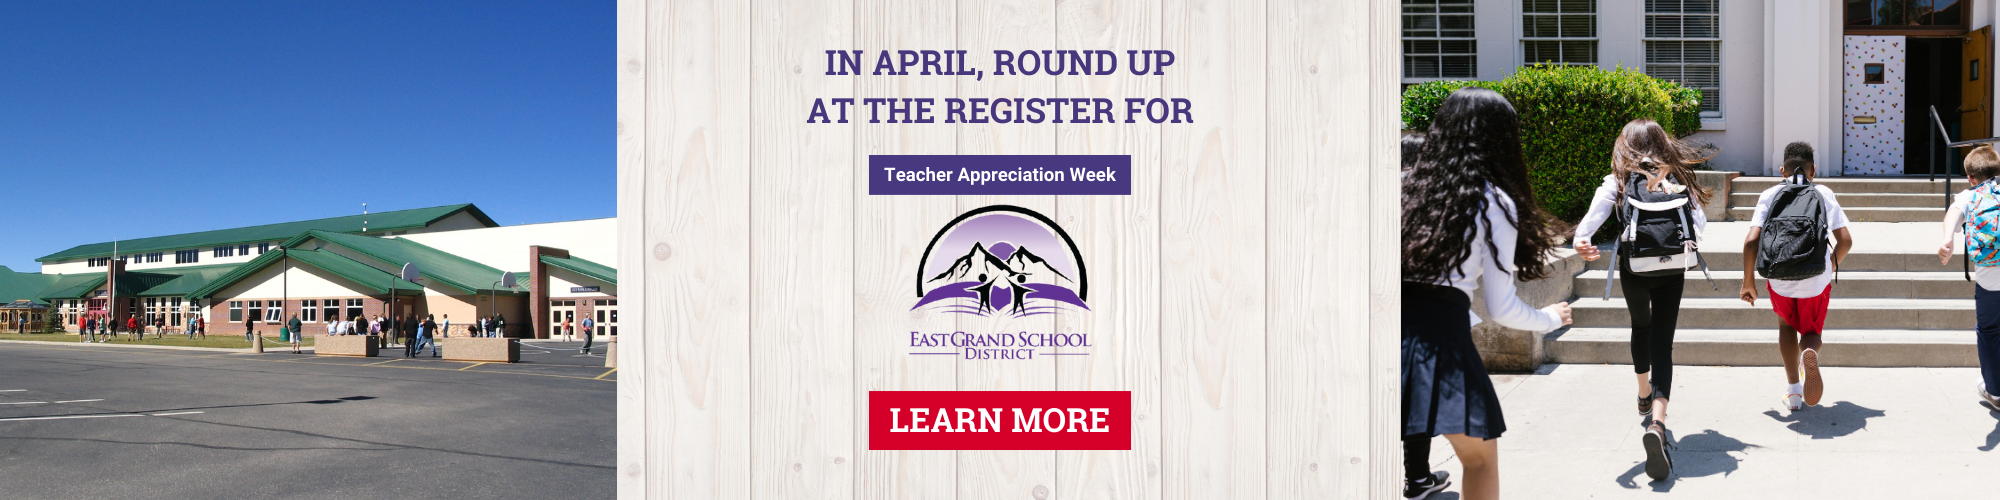 Round Up Operation for the Teacher Appreciation Week at East Grand School District